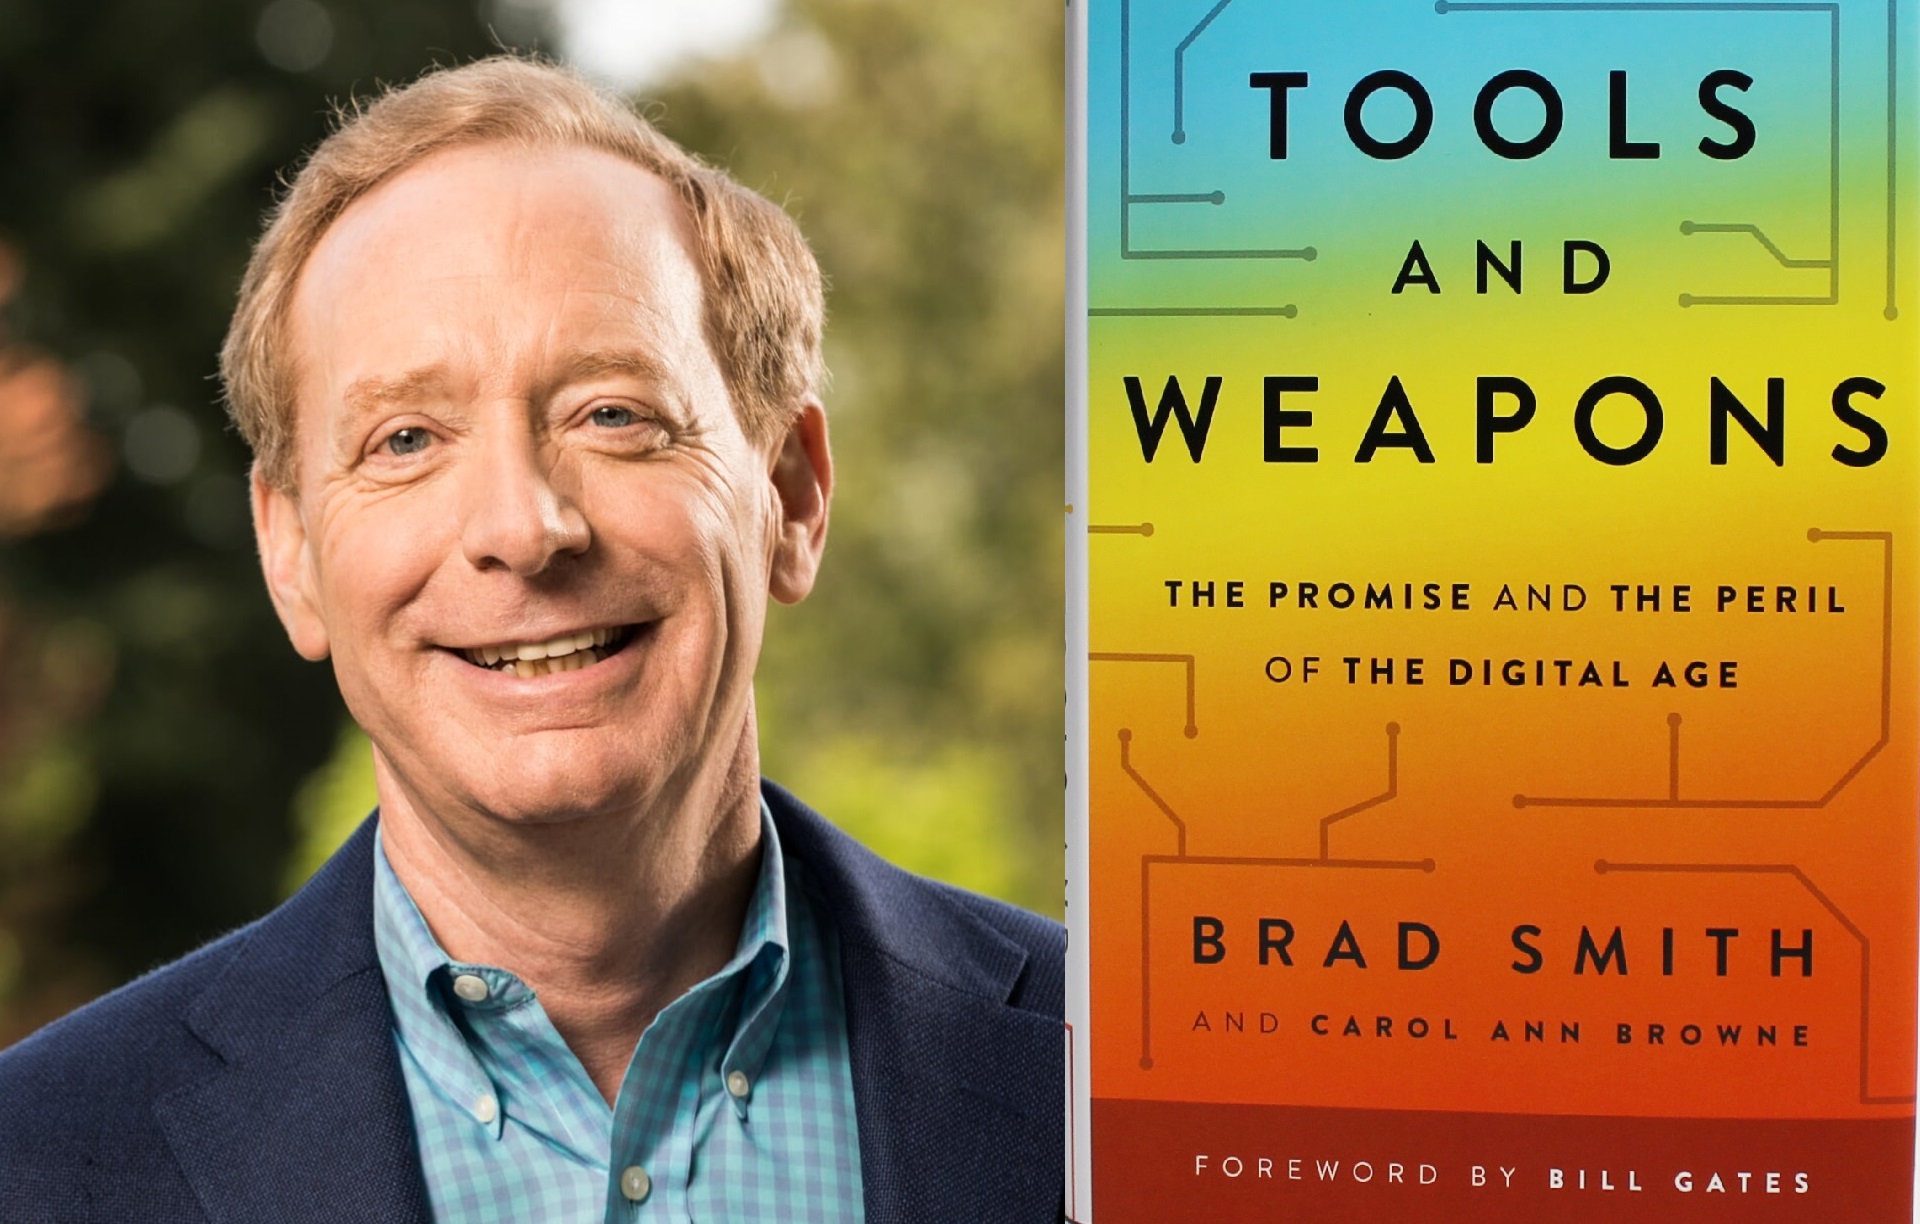 Brad Smith and the Tools & Weapons book